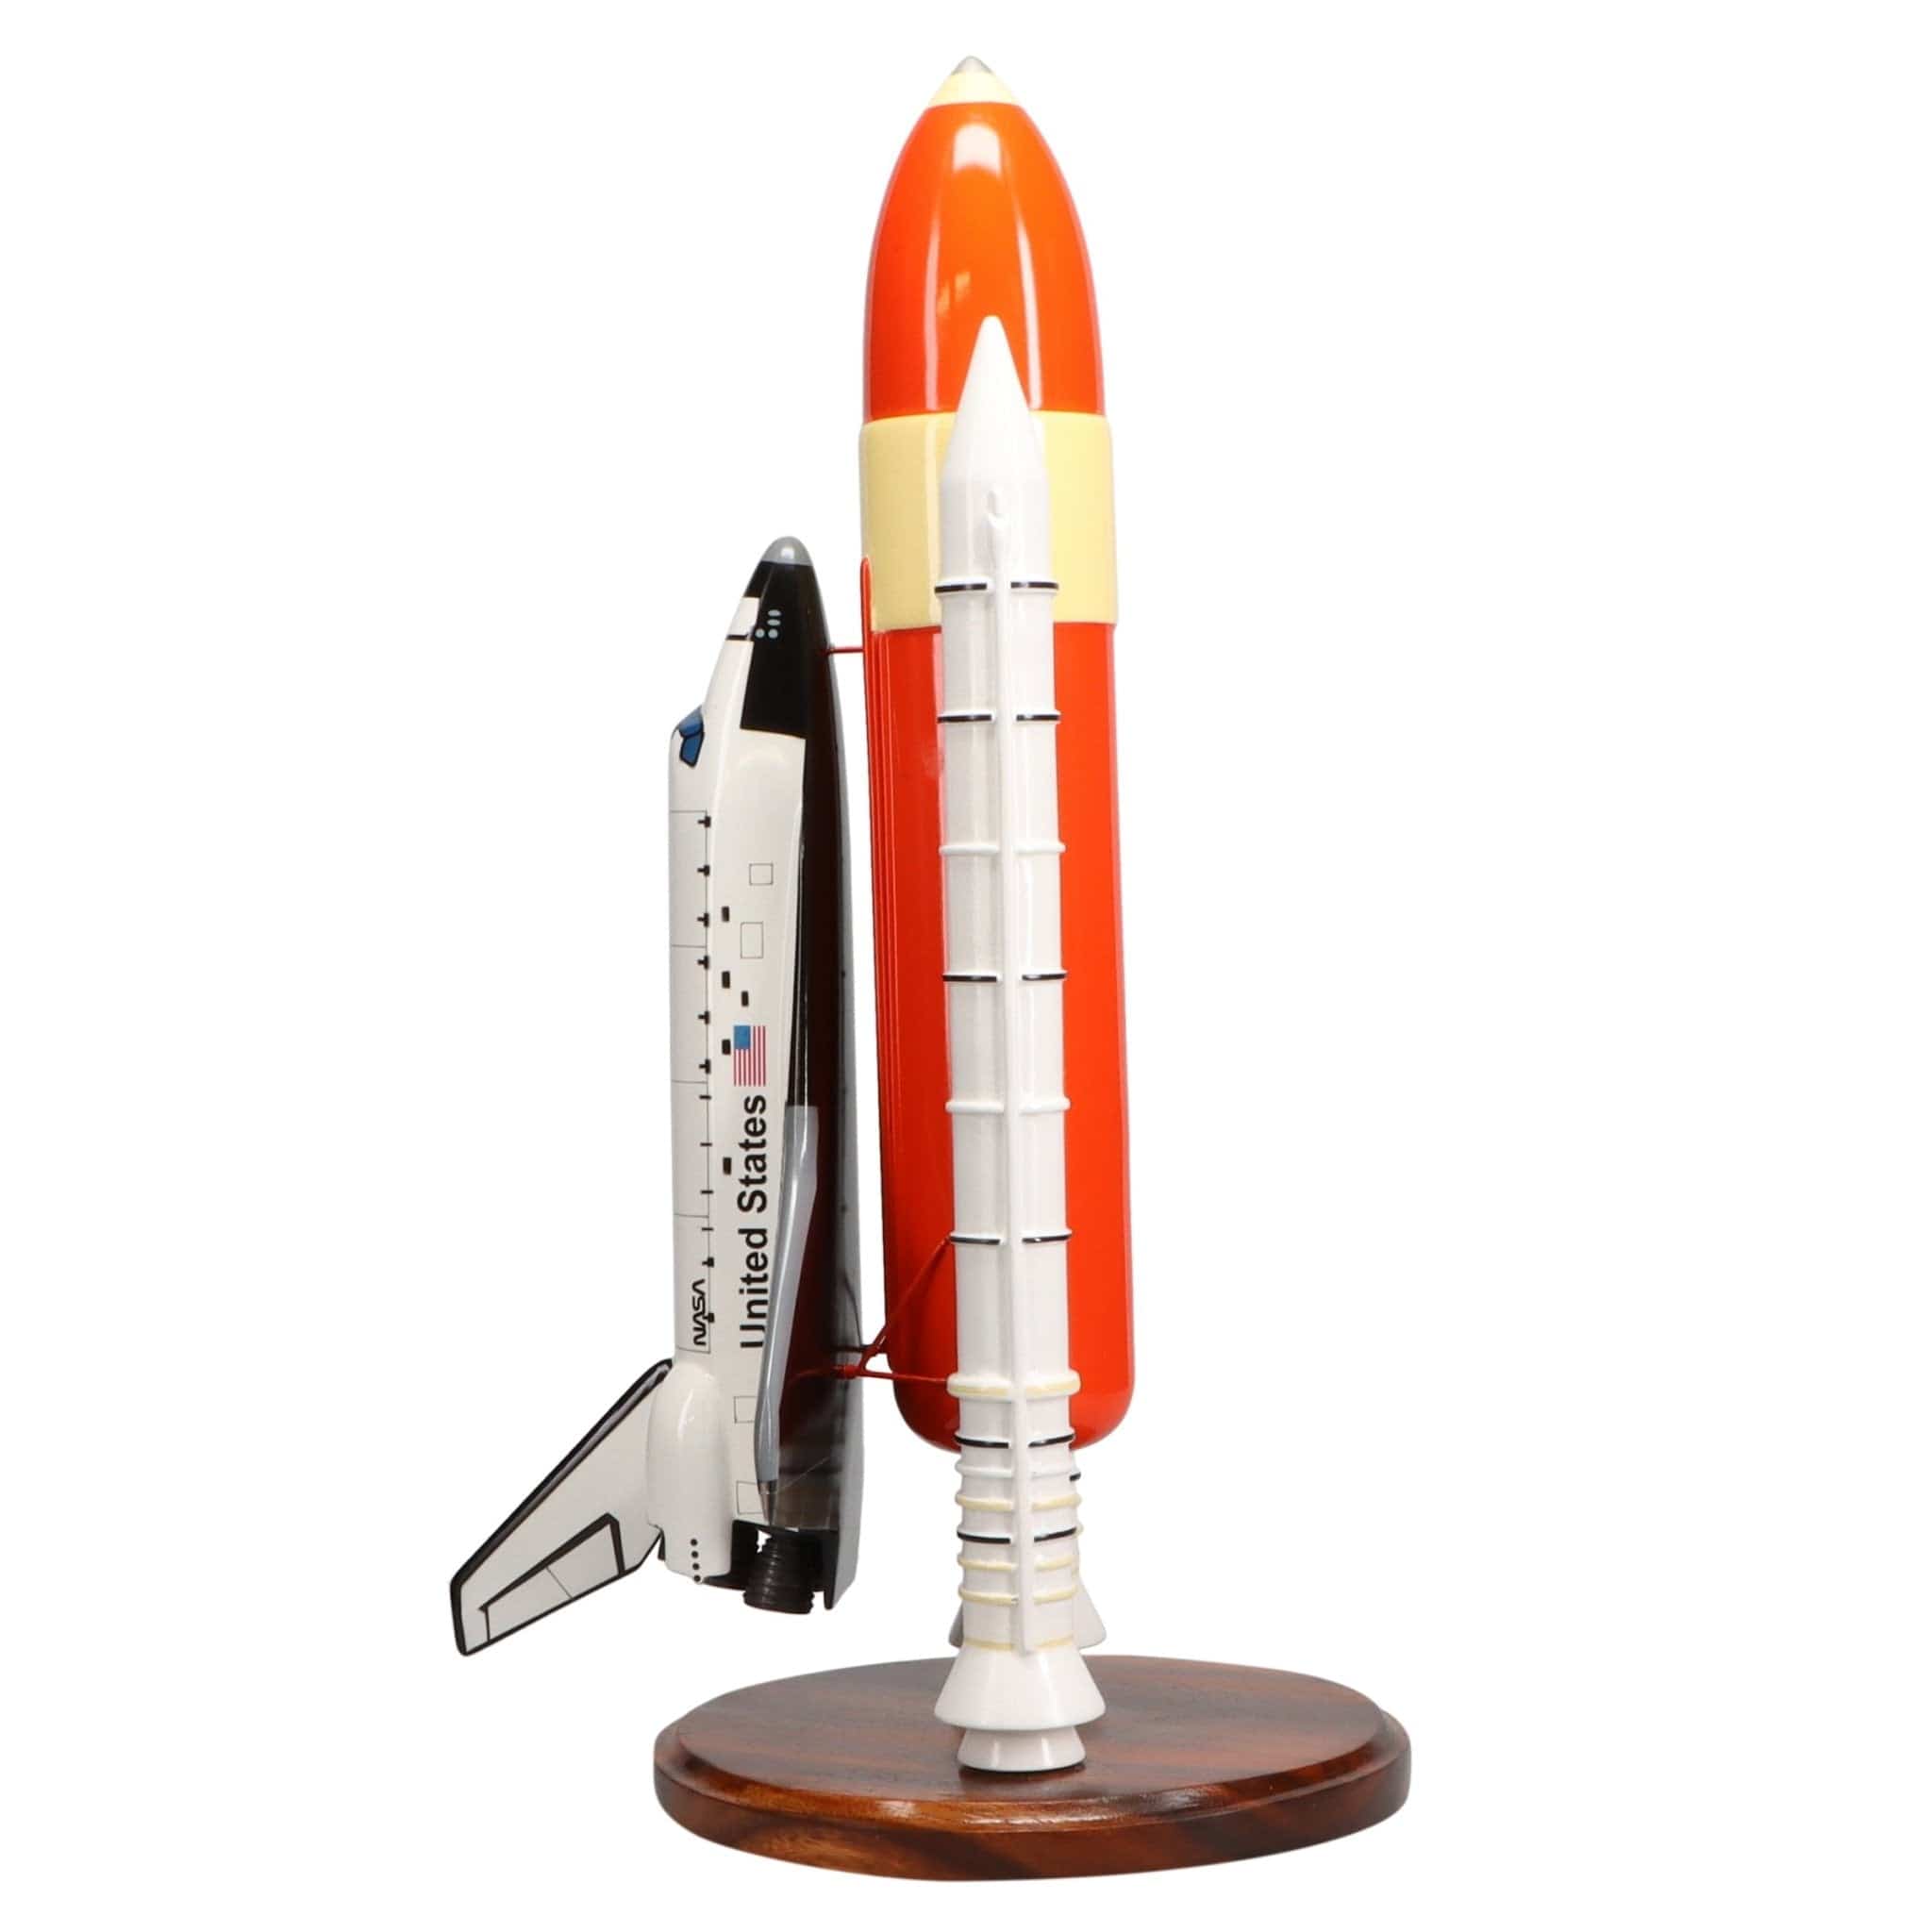 Space Shuttle Discovery with Booster Large Mahogany Model